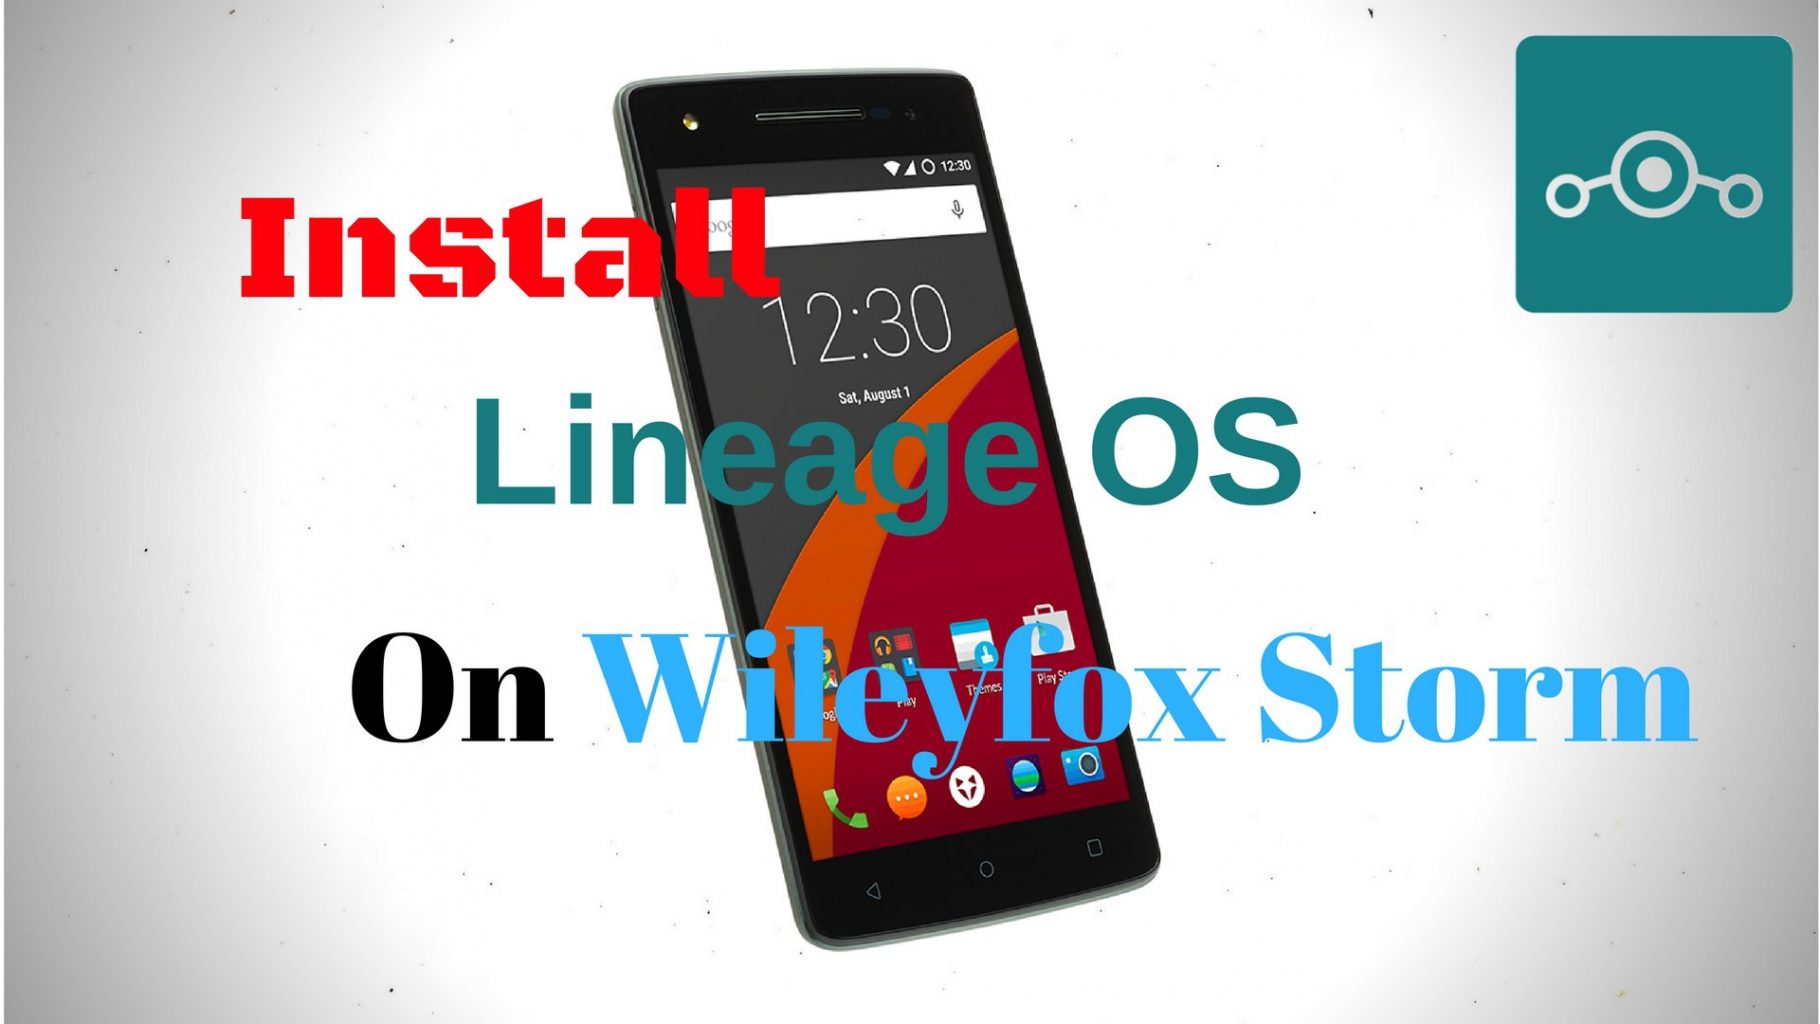 Install Lineage OS on Wileyfox Storm